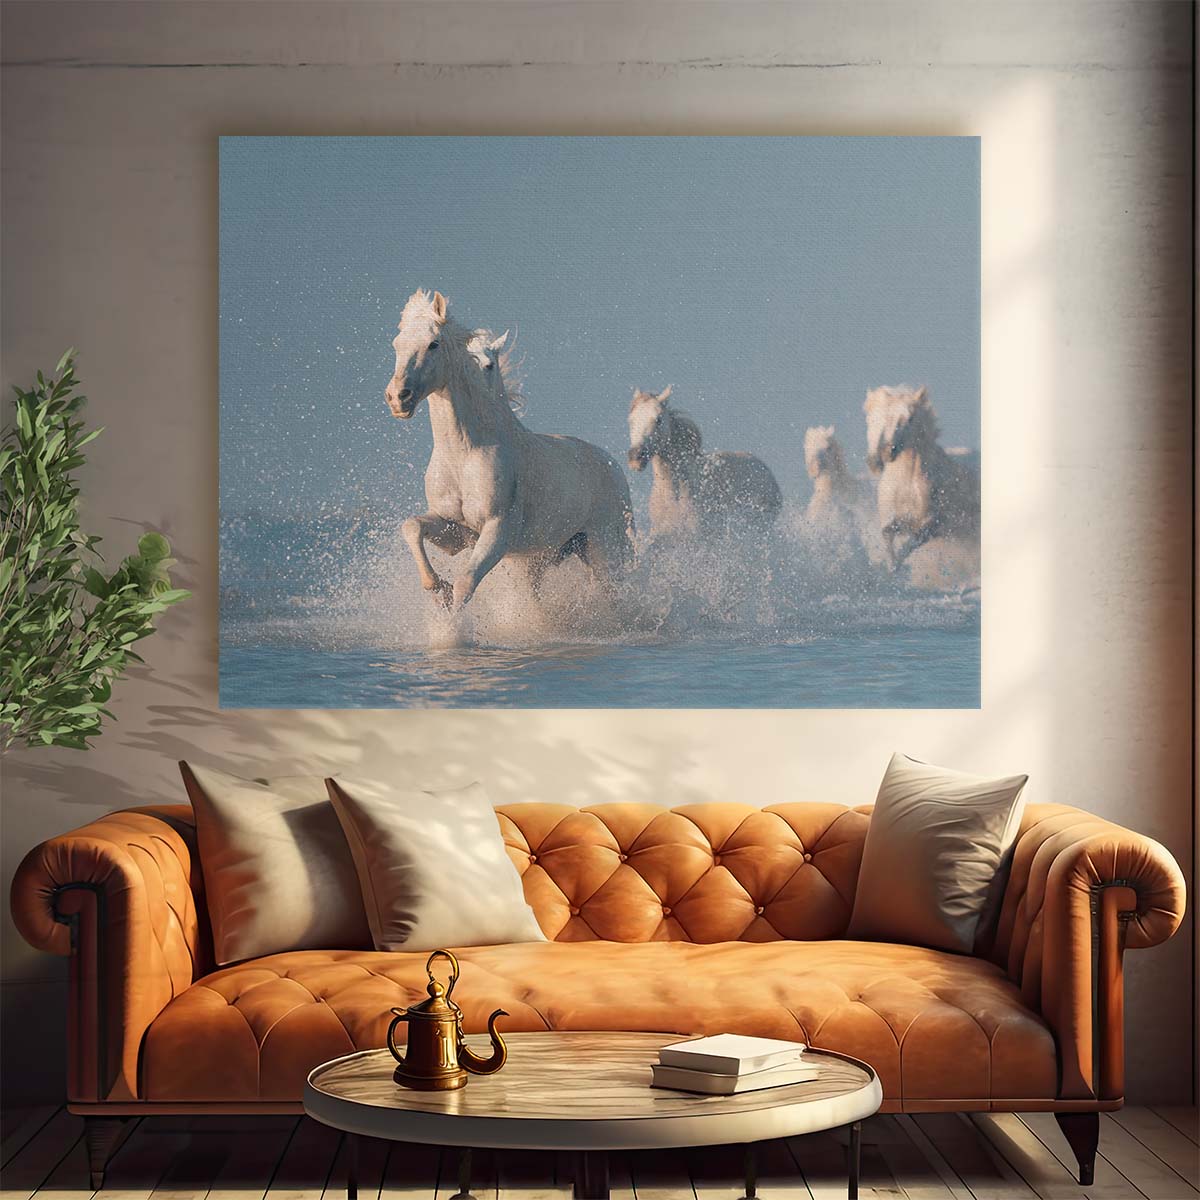 Majestic Camargue Horses in Sunset Sprint Wall Art by Luxuriance Designs. Made in USA.